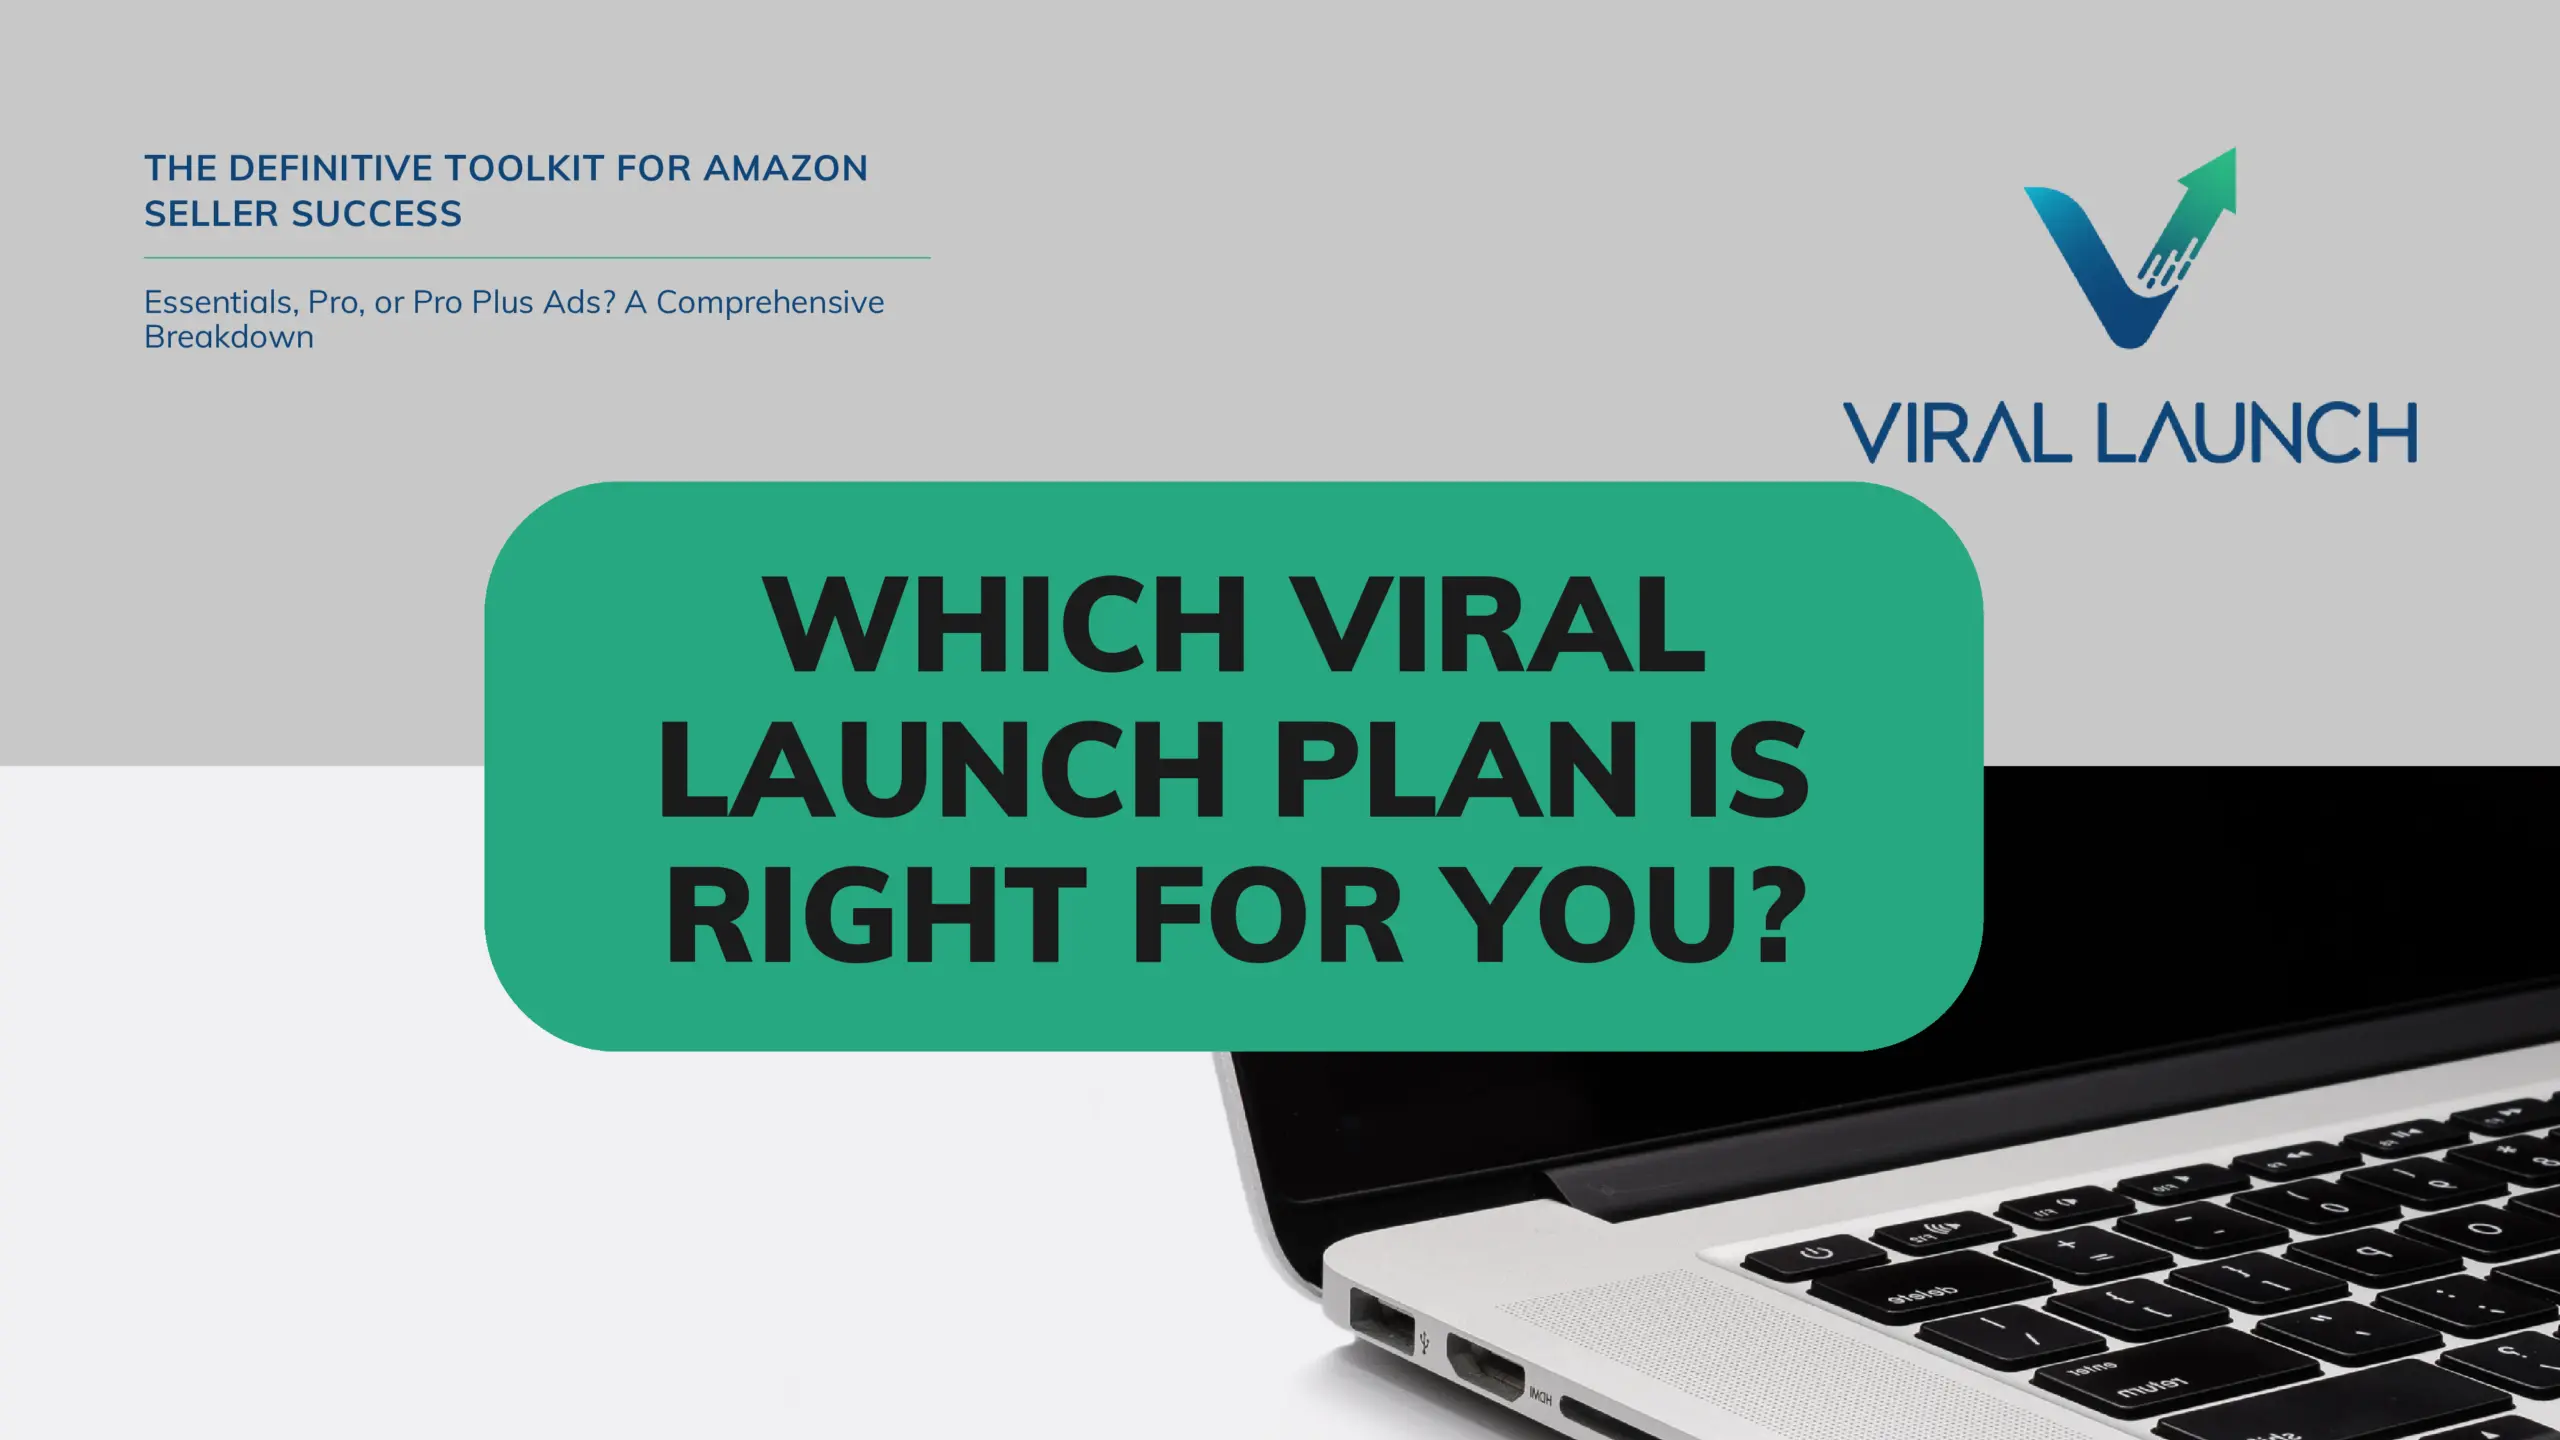 Understanding Viral Launch's Pricing Plans: Essentials, Pro, and Pro Plus Ads